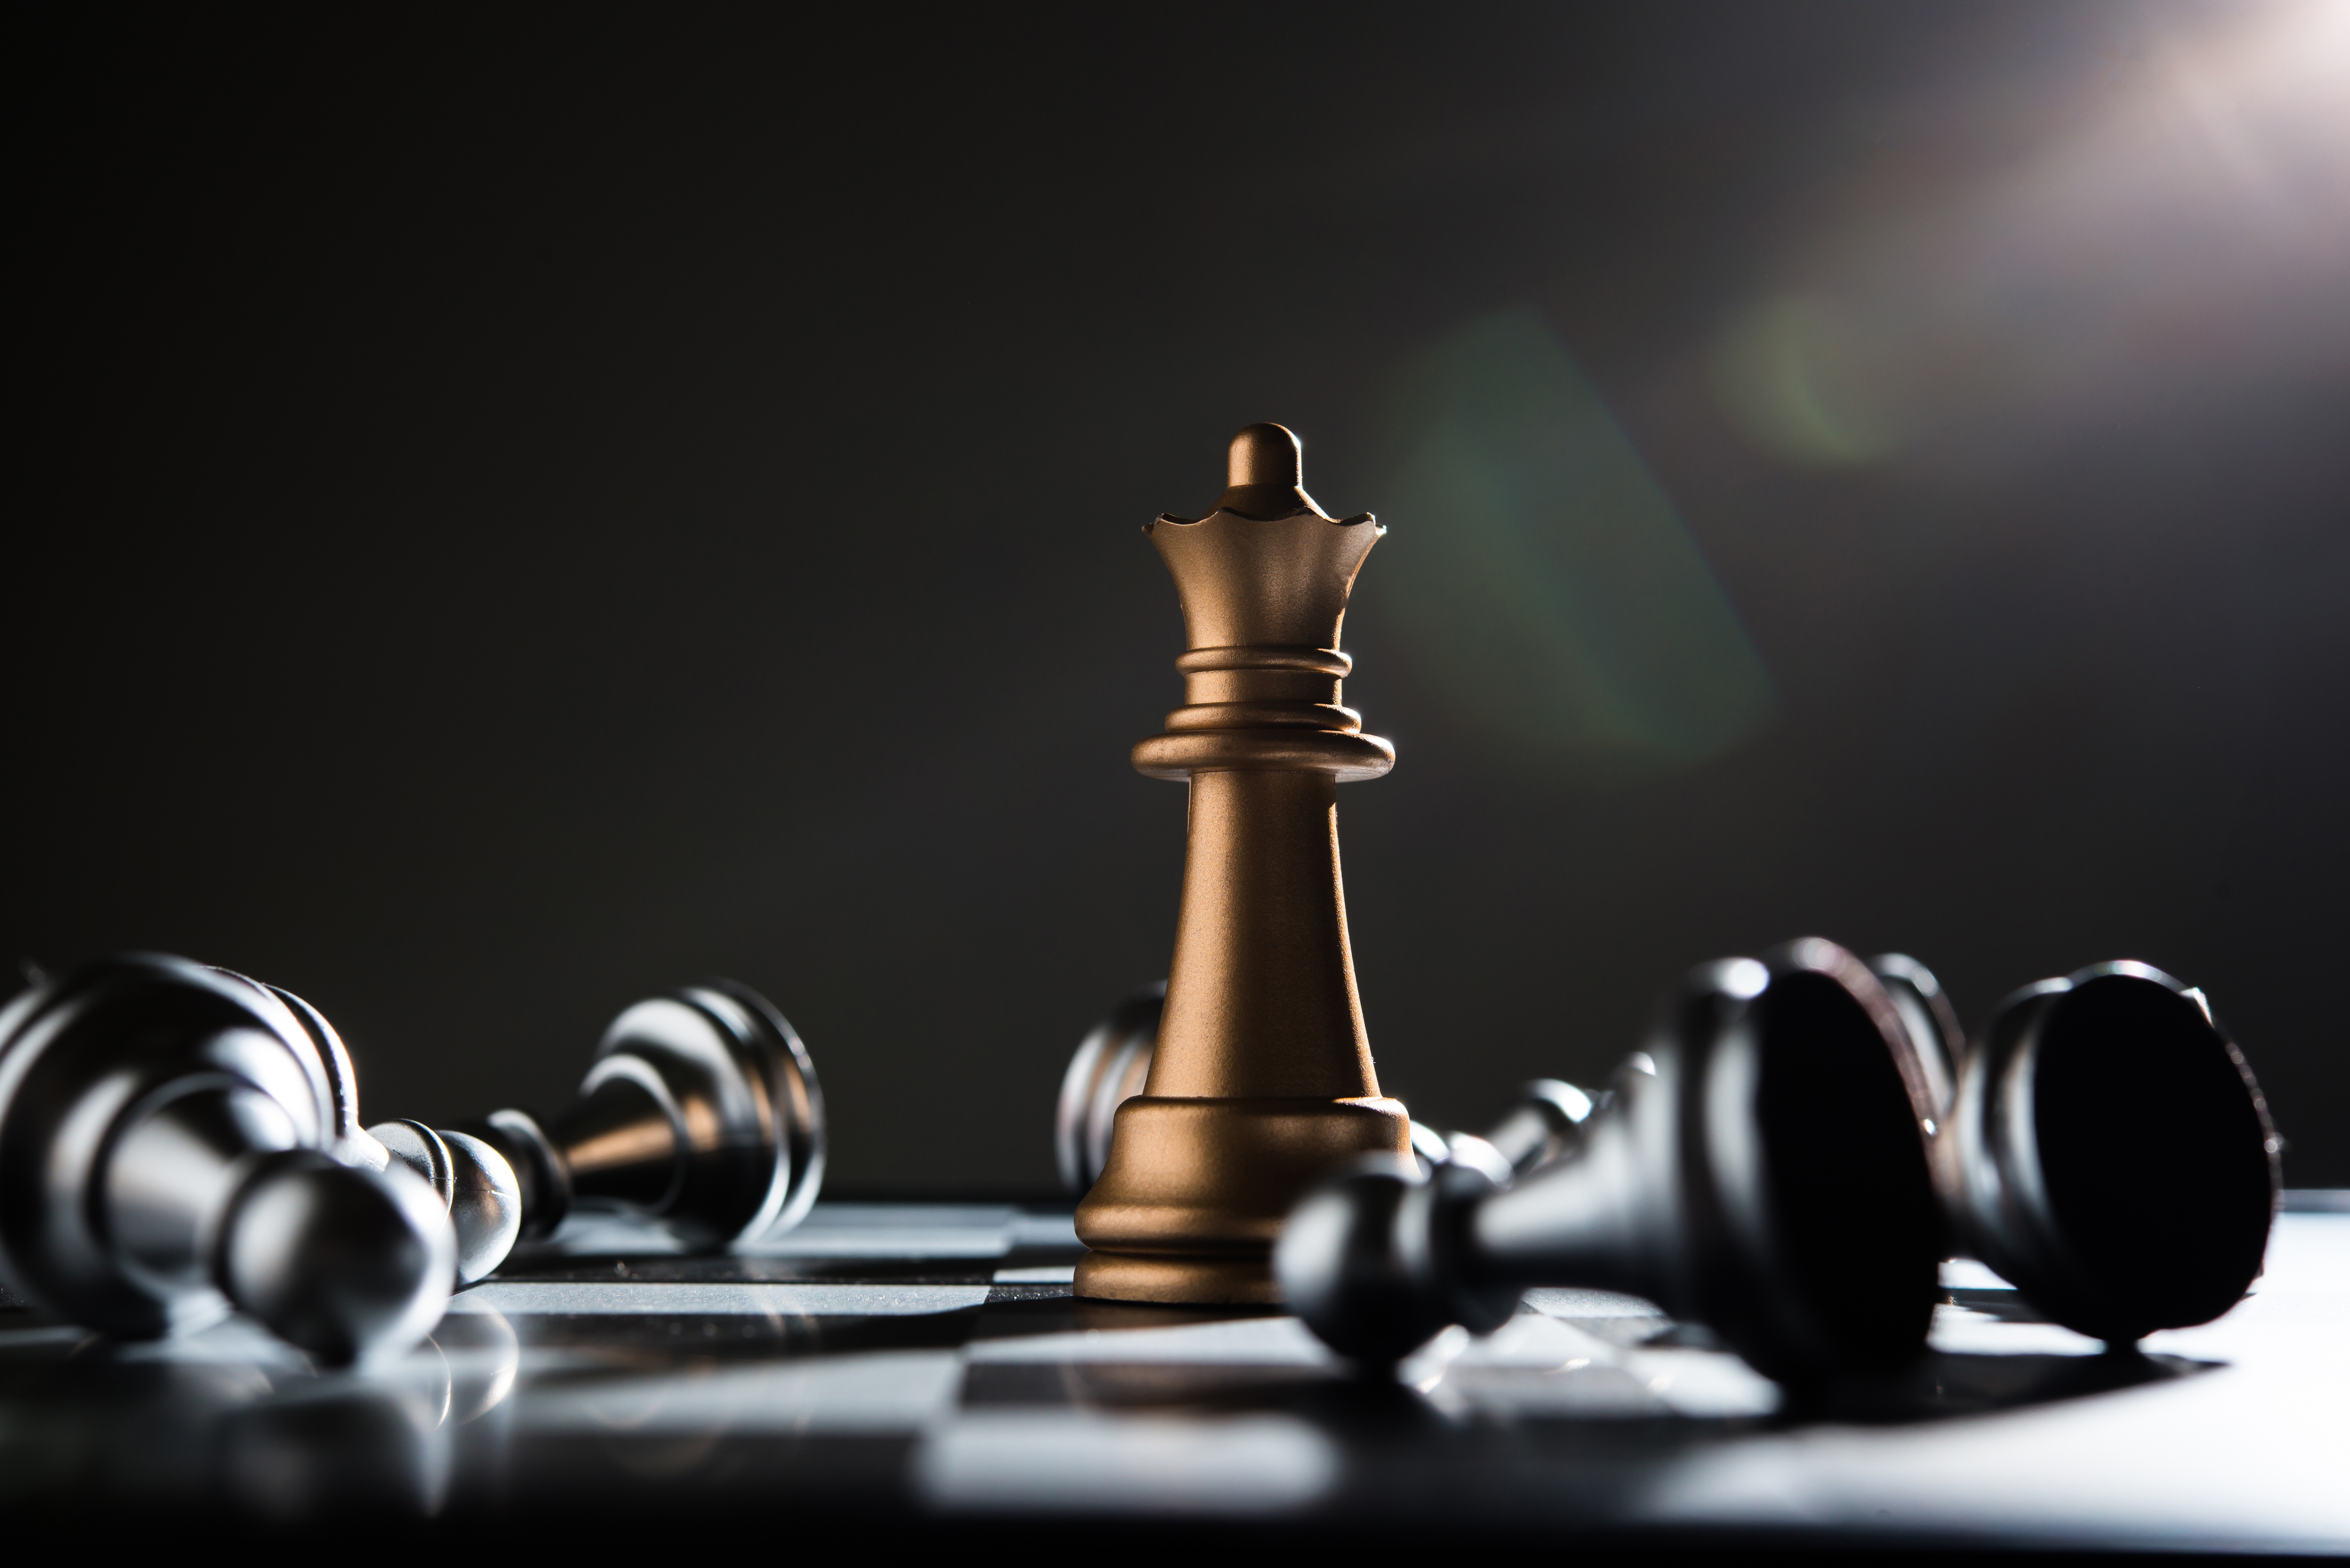 Chess wallpapers hd, desktop backgrounds, images and pictures